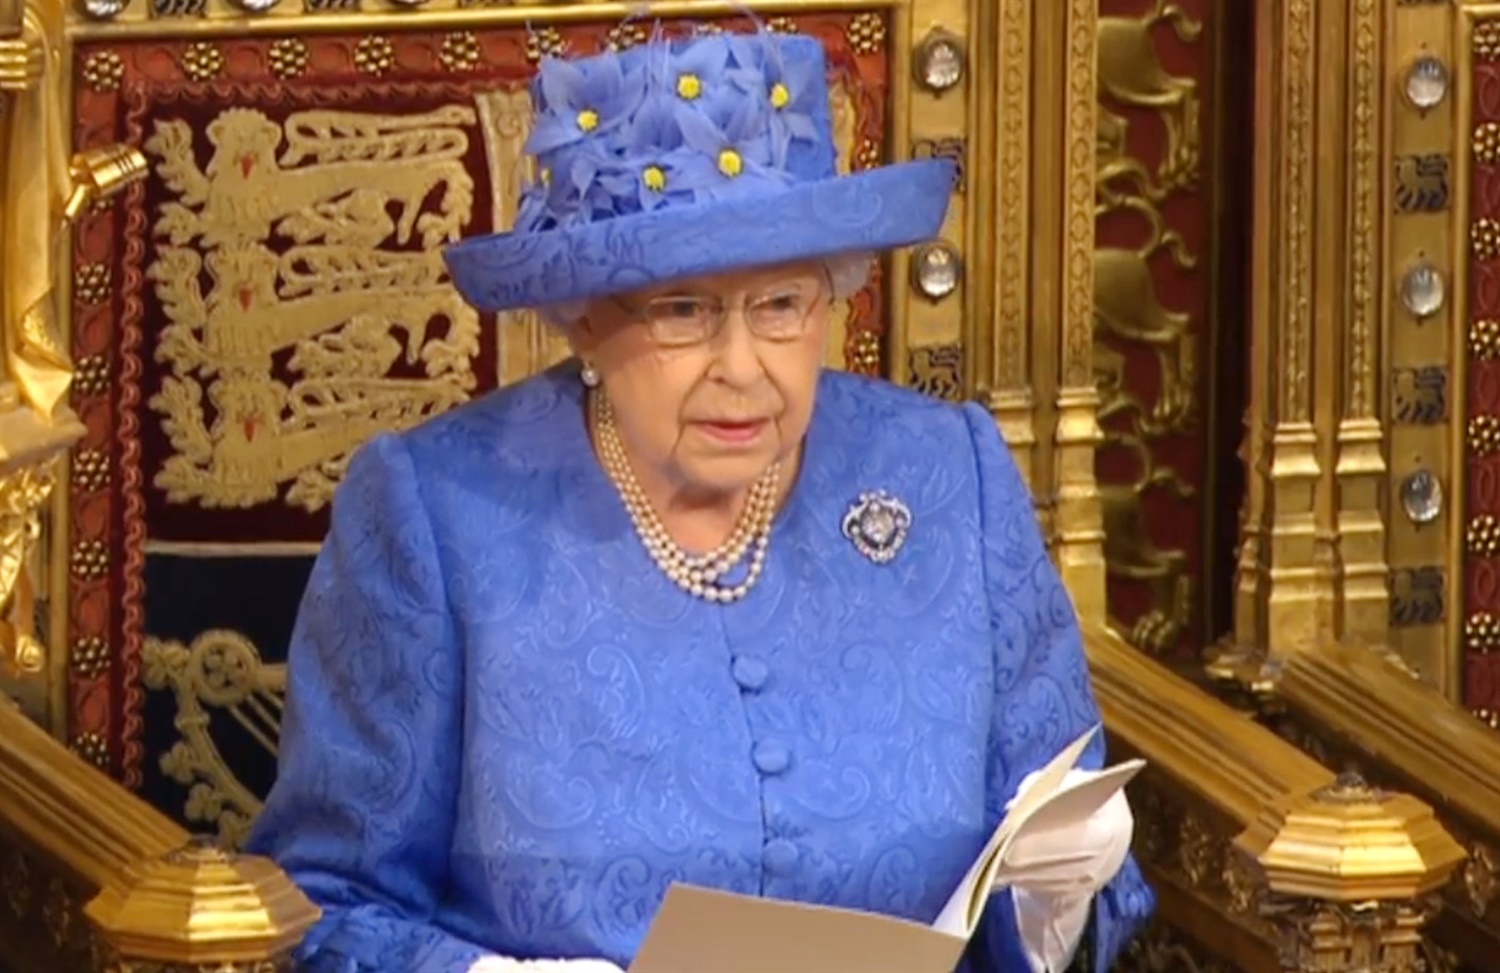 Queen confirms commitment to bring forward HS2 phase 2 bill